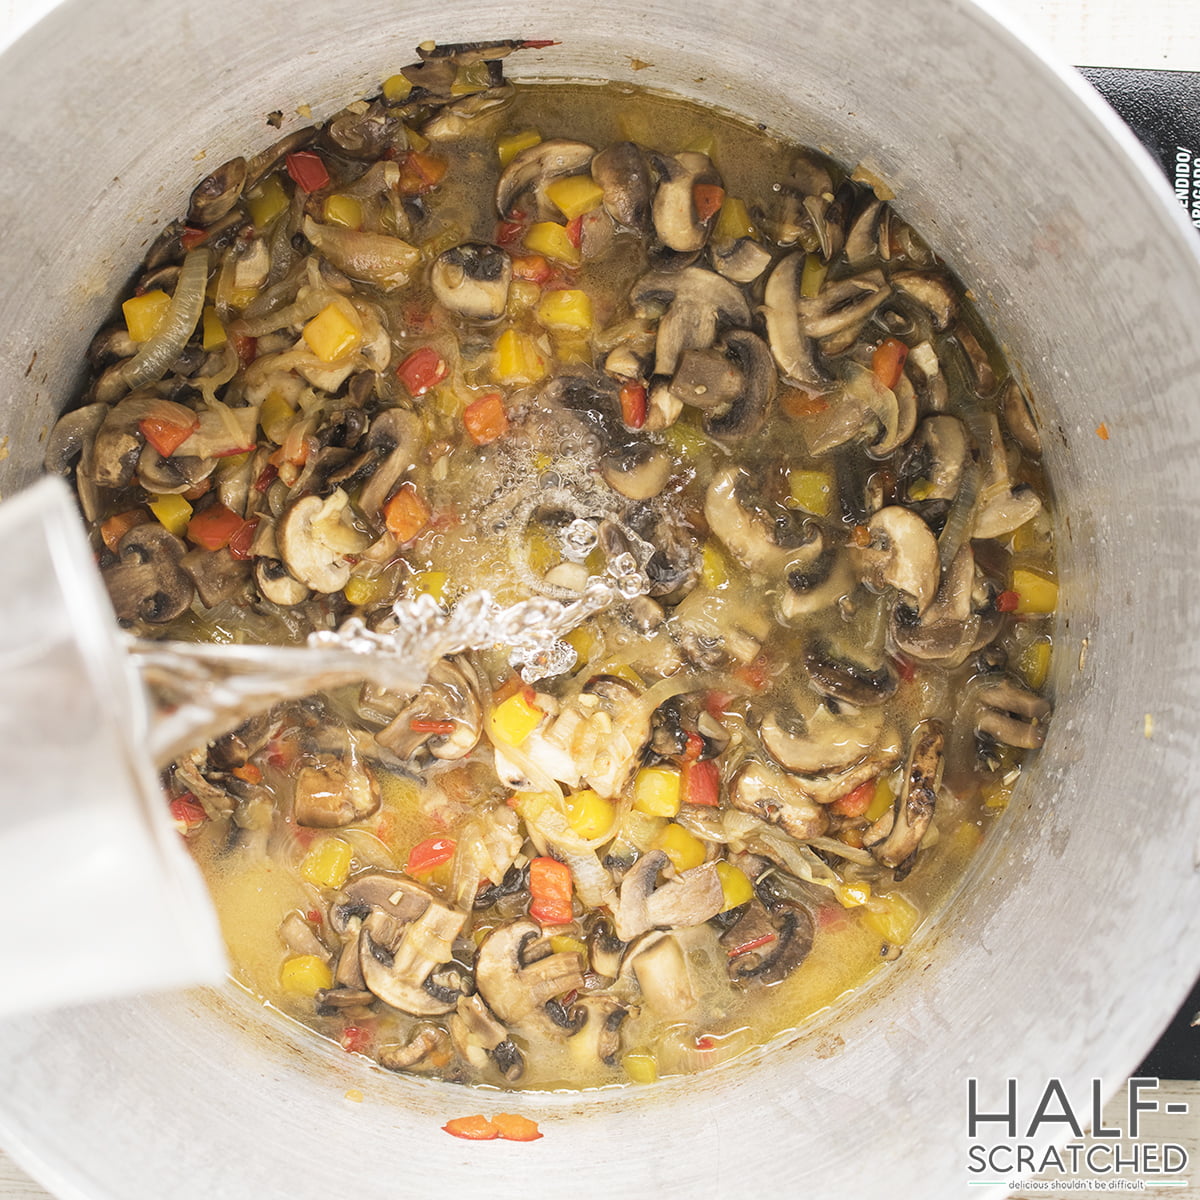 Vinegar being poured into a pot with mushrooms and bell peppers